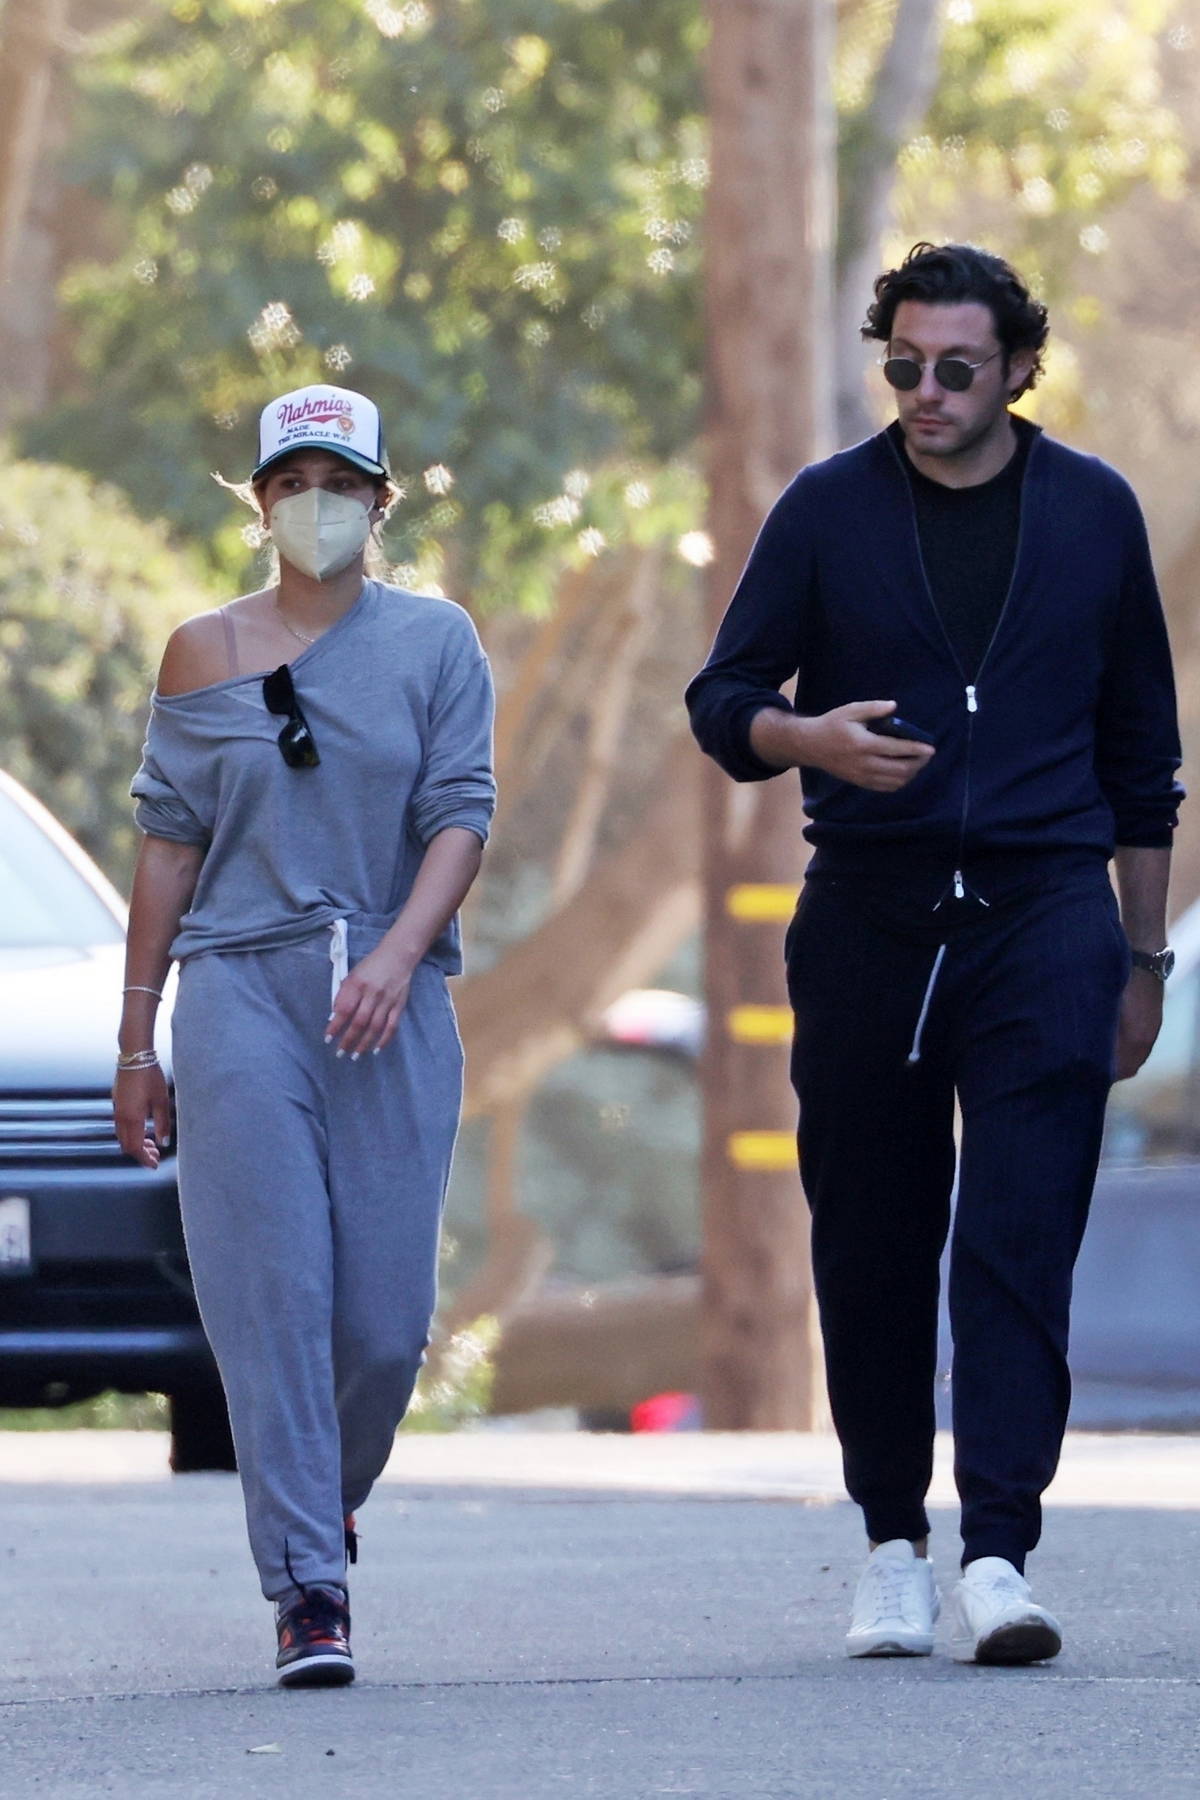 Sofia Richie dresses down in grey sweatsuit while out for an